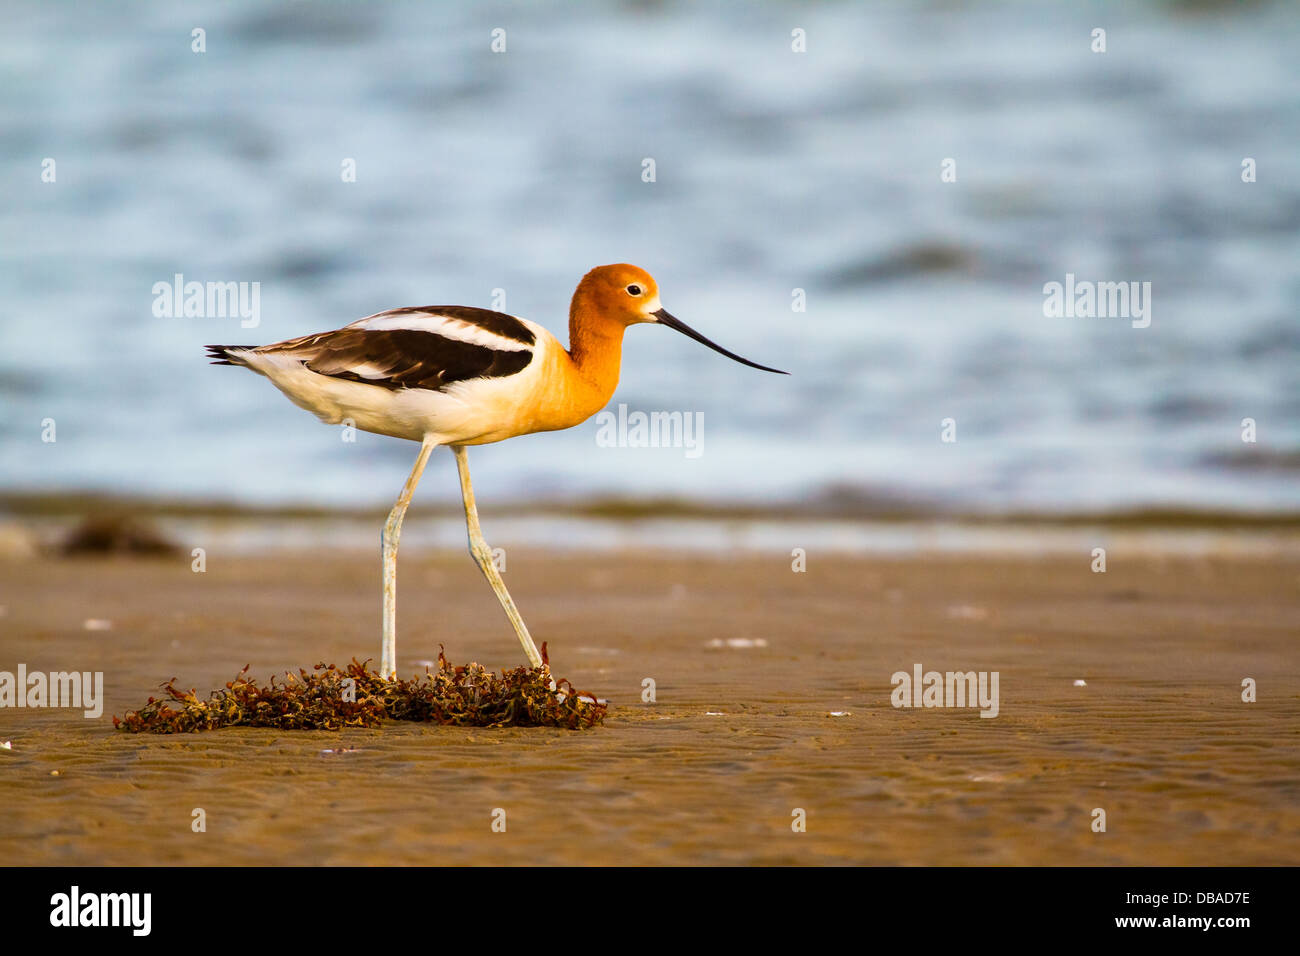 An American Avocet was walking on a quiet beach in the evening sun in Bolivar Peninsula, TX. Stock Photo